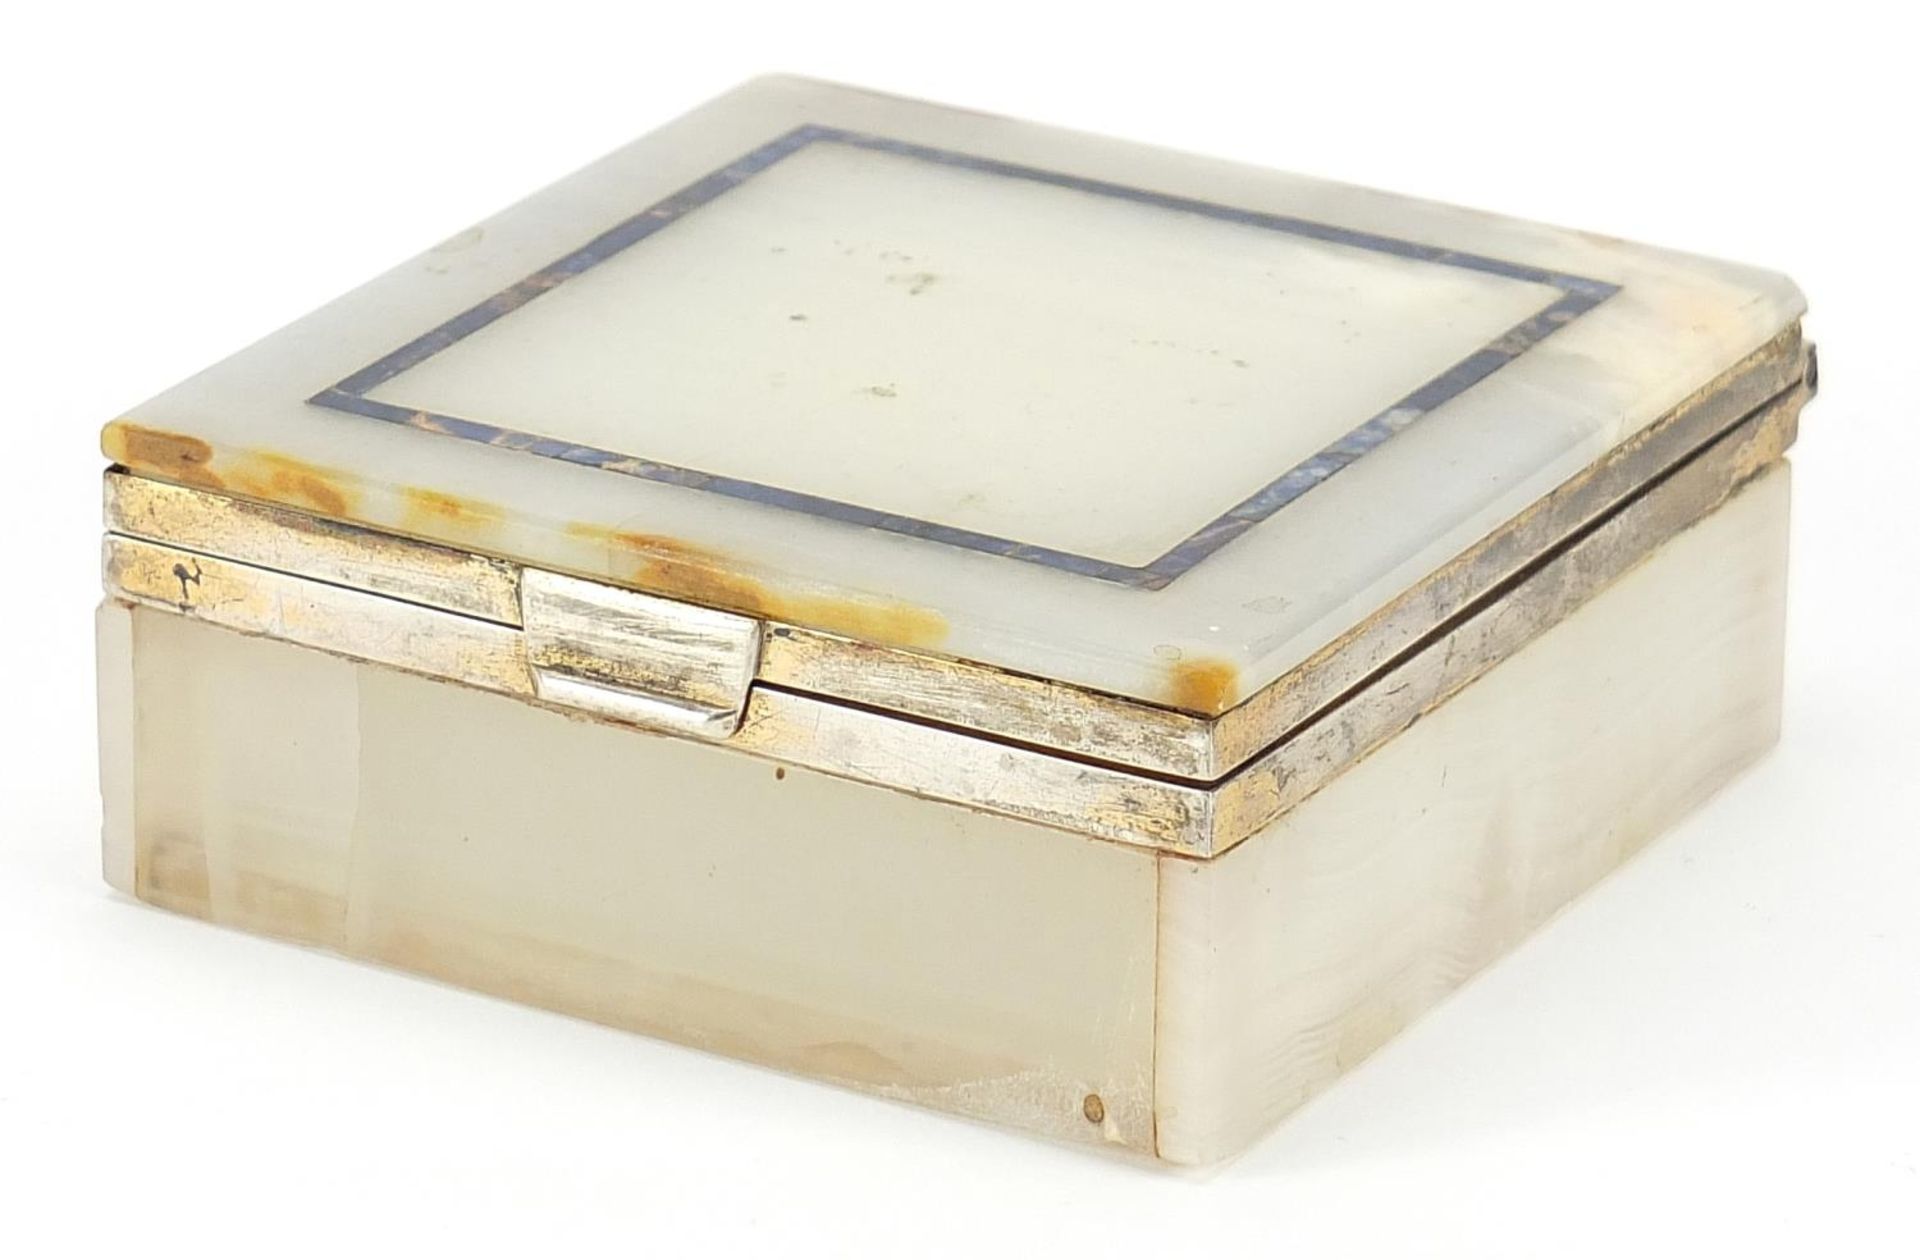 Silver mounted onyx and lapis lazuli cigarette box, 4.5cm H x 9.5cm W x 10cm D One of the front